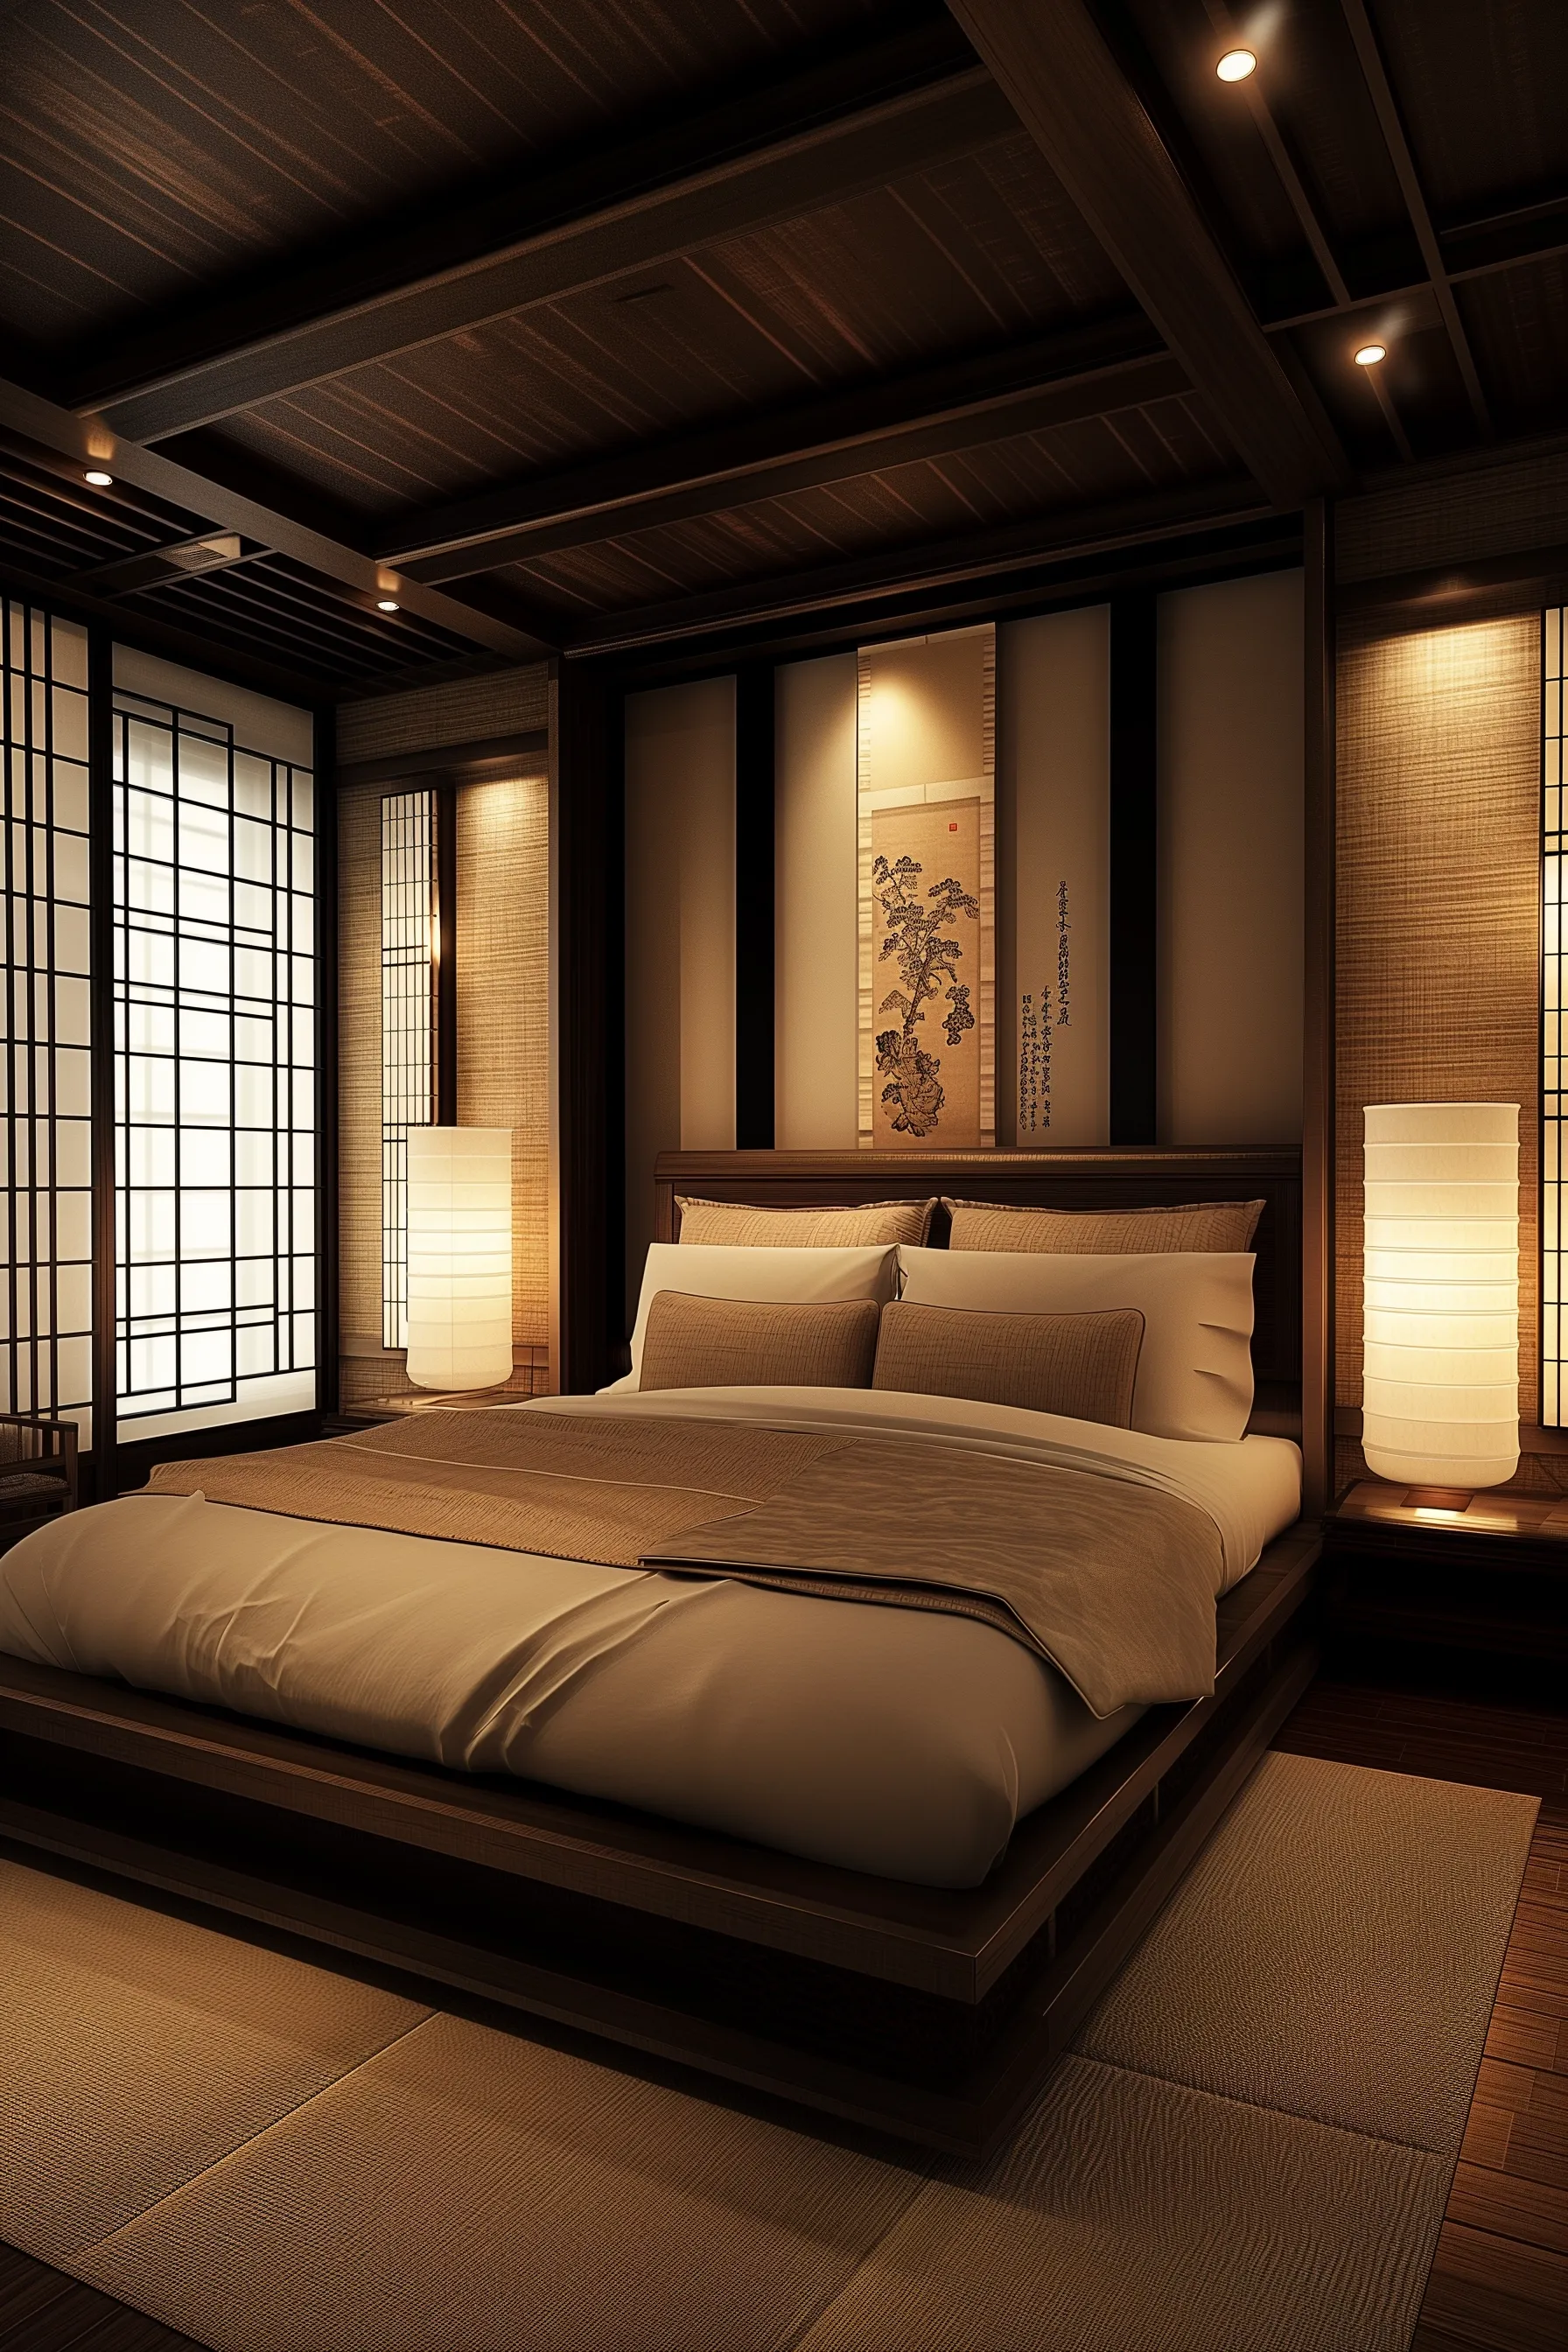 A room showcasing japanese style bedroom furniture with a low platform bed. There is asian wall art, with lots of pops of color. with burnt orange.